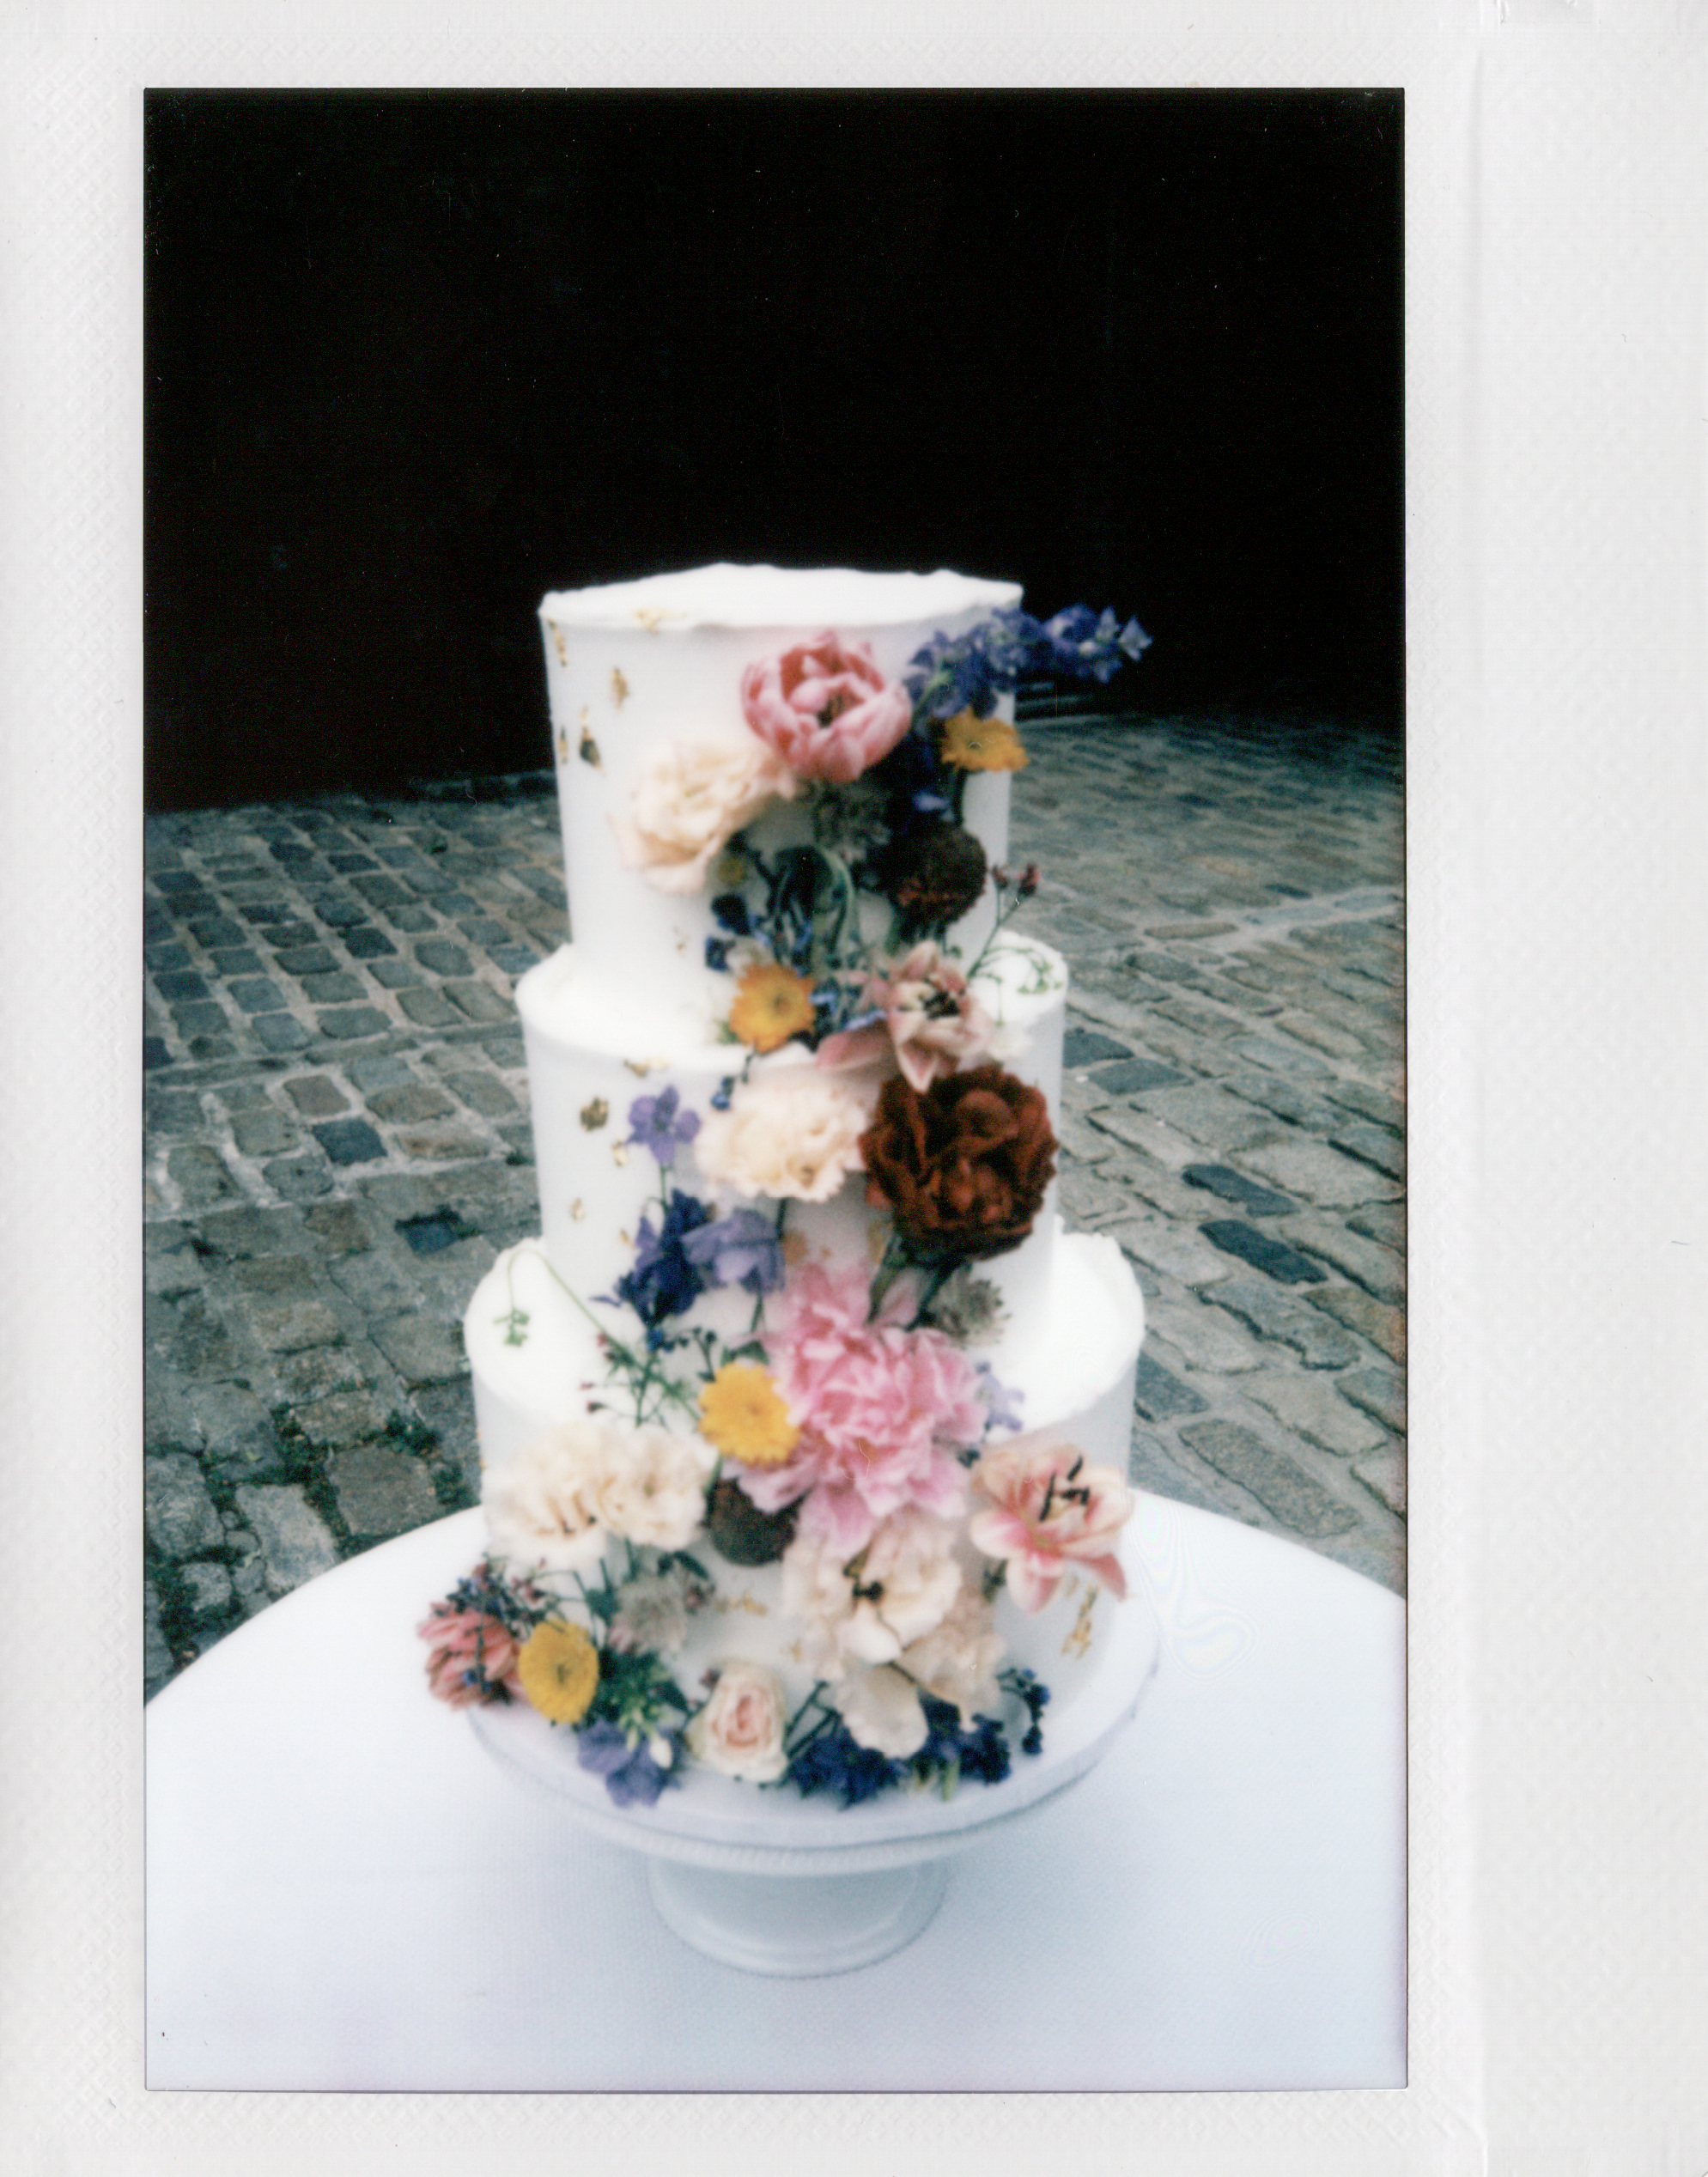 A beautiful wedding cake covered in flowers. Film photography image by Jenny Fu Studio